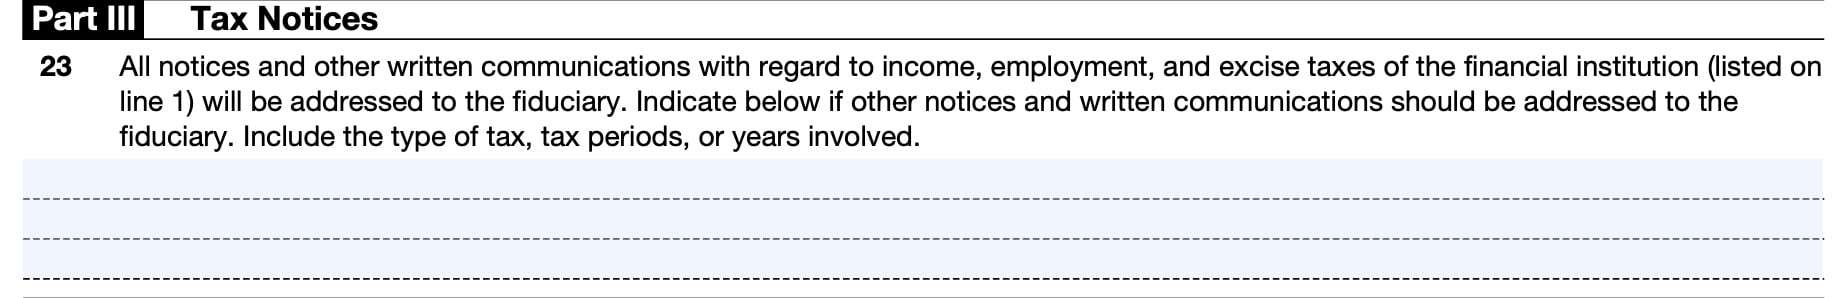 irs form 56-f, part III: tax notices